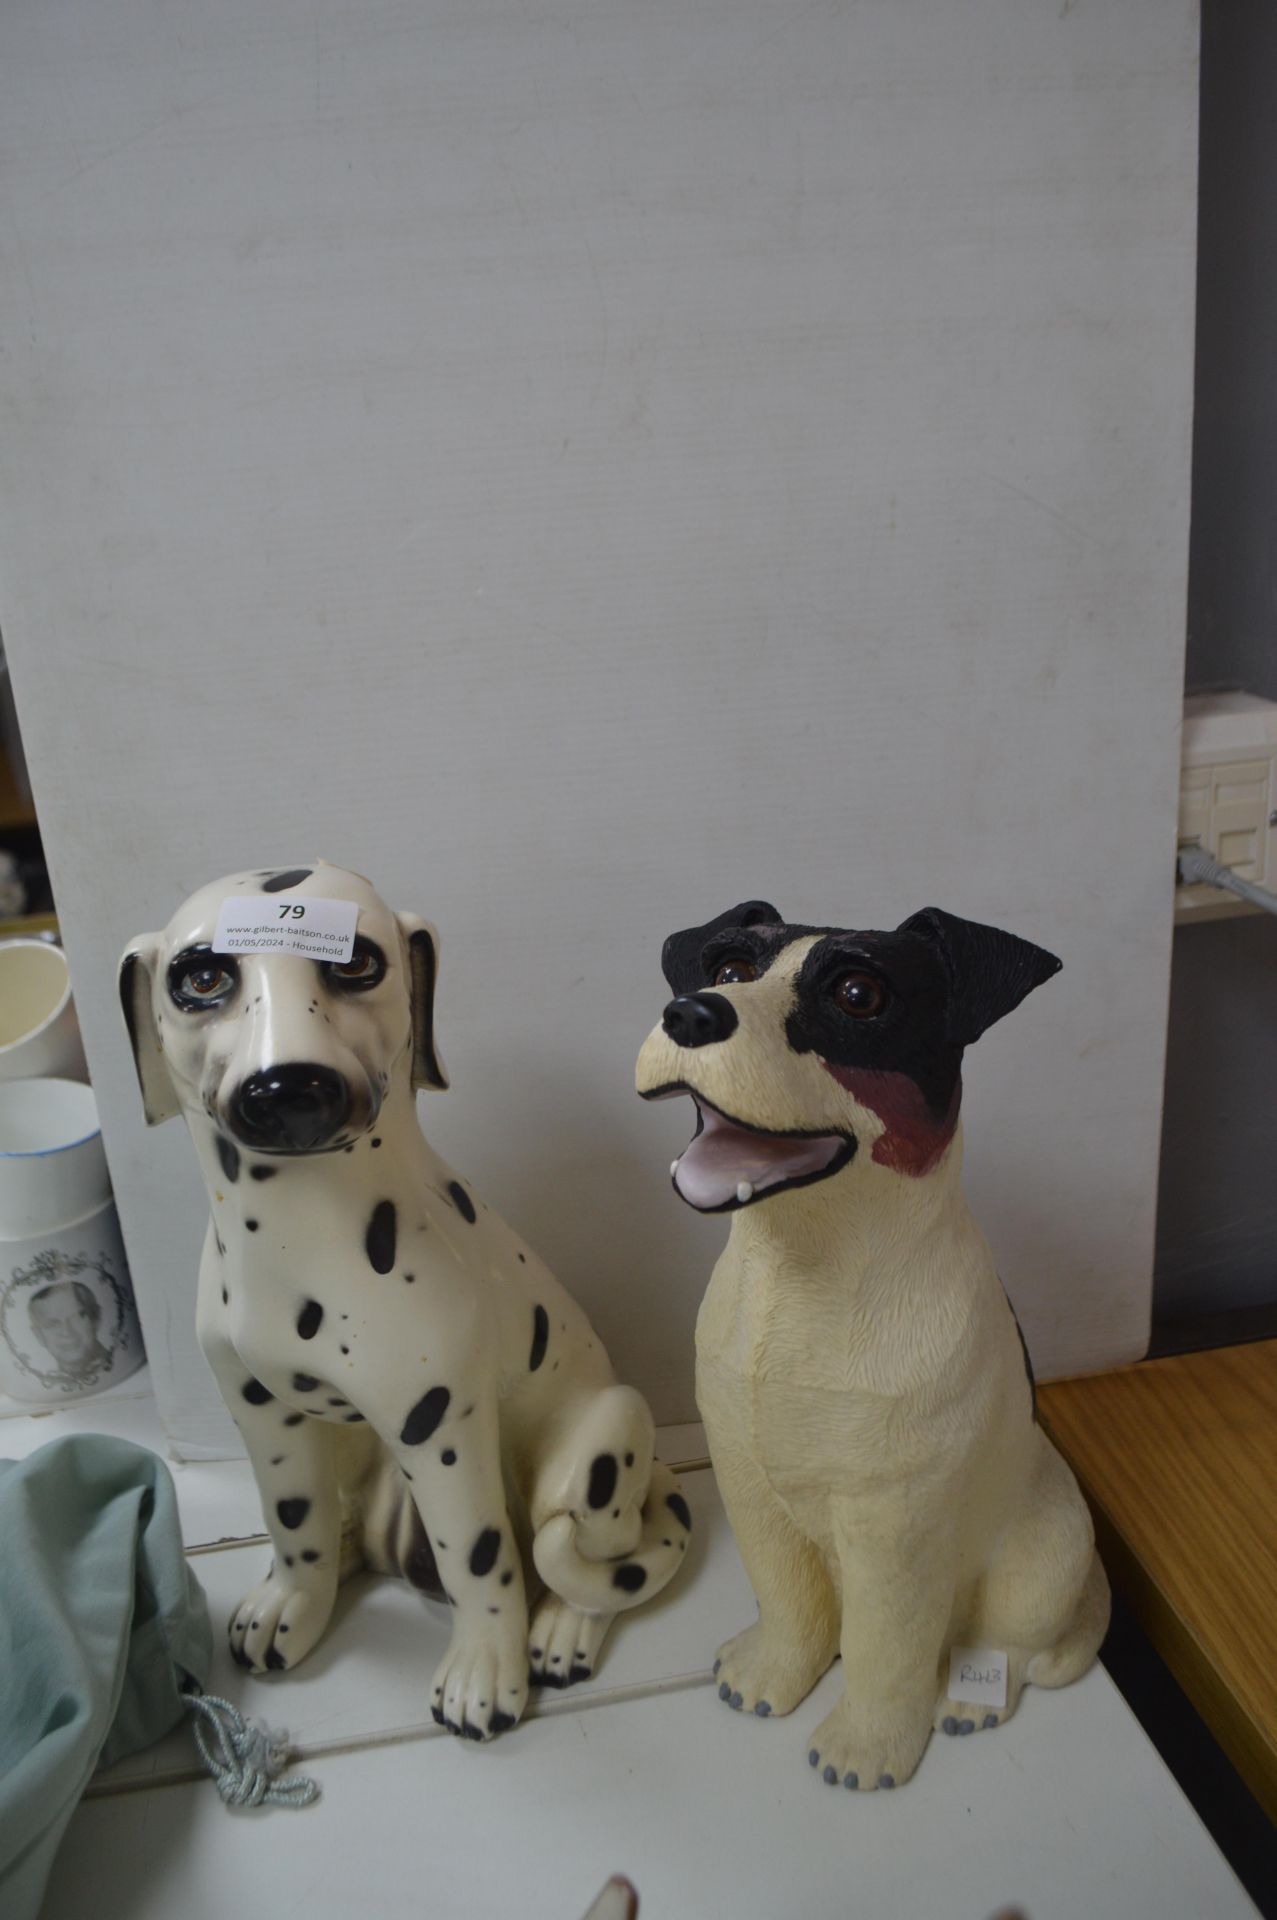 Pair of Dog Ornaments